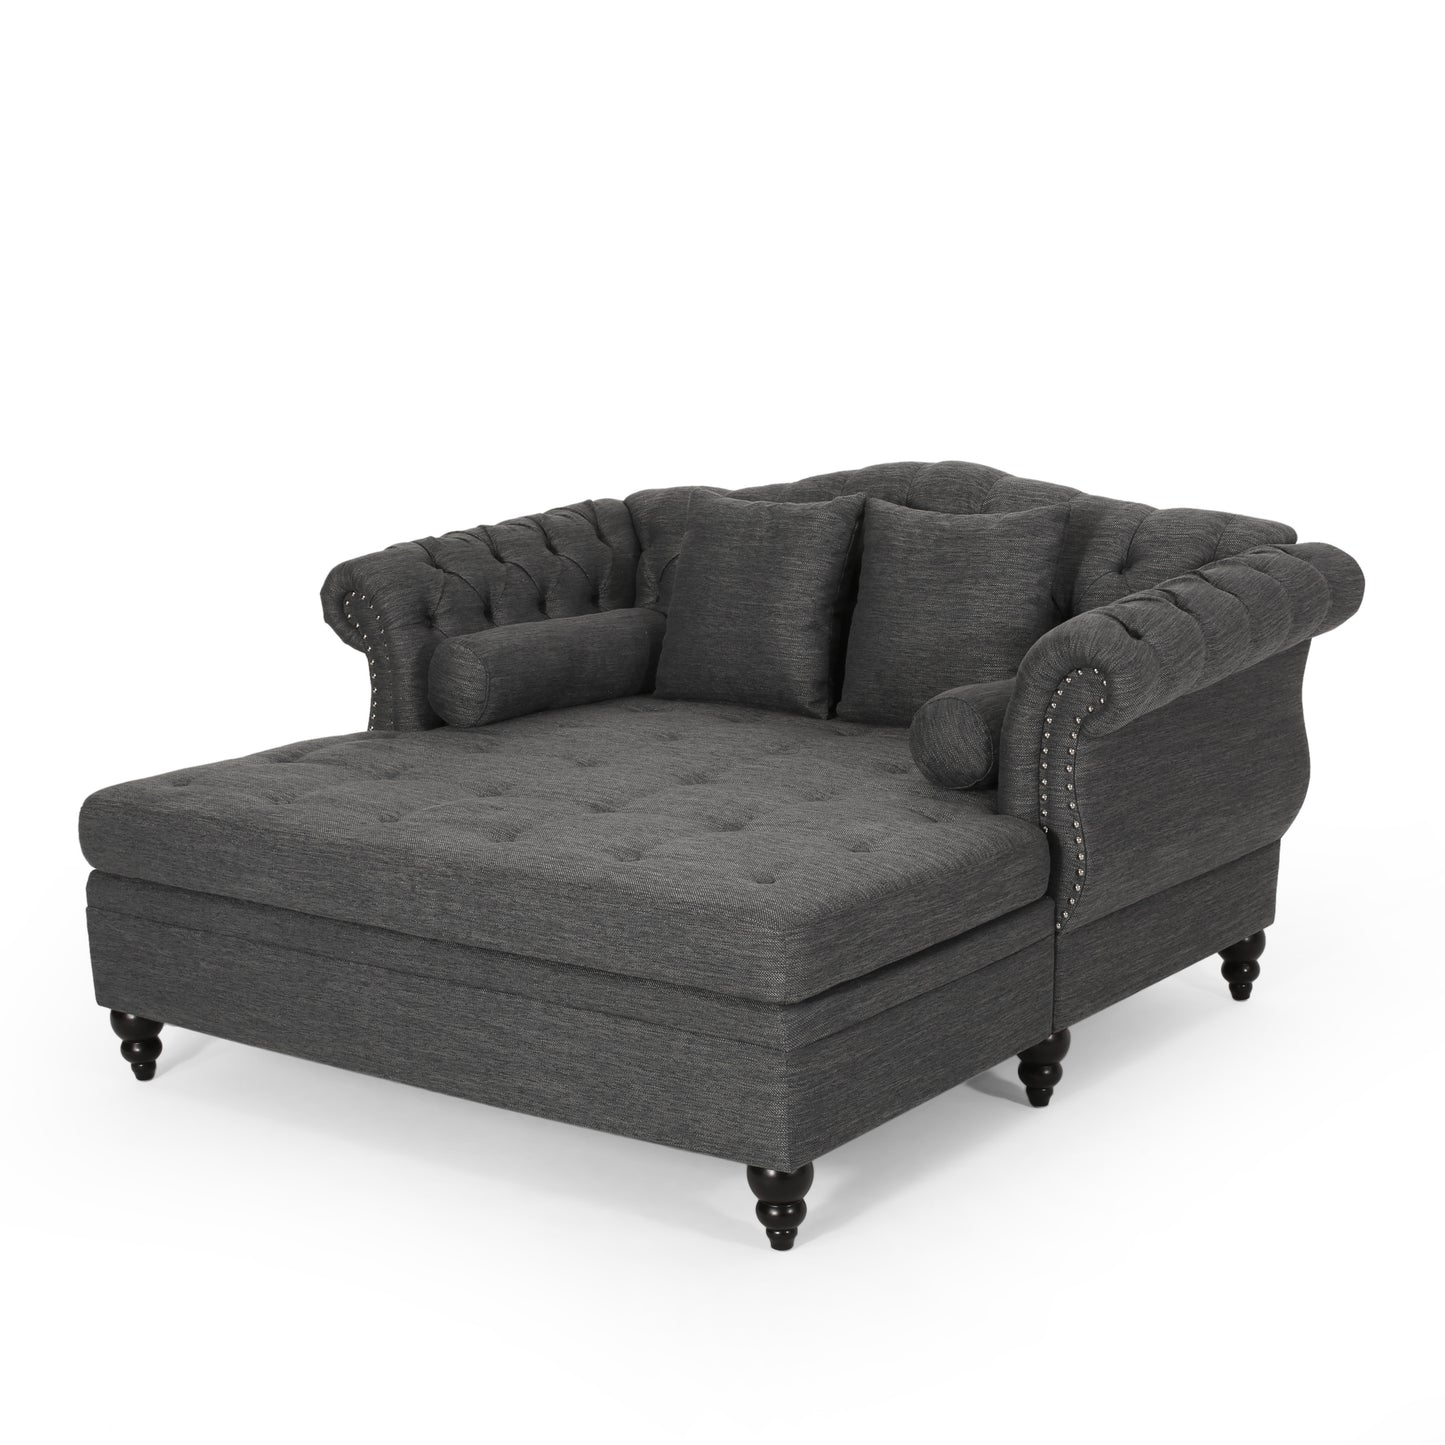 Horeb Contemporary Tufted Double Chaise Lounge with Accent Pillows